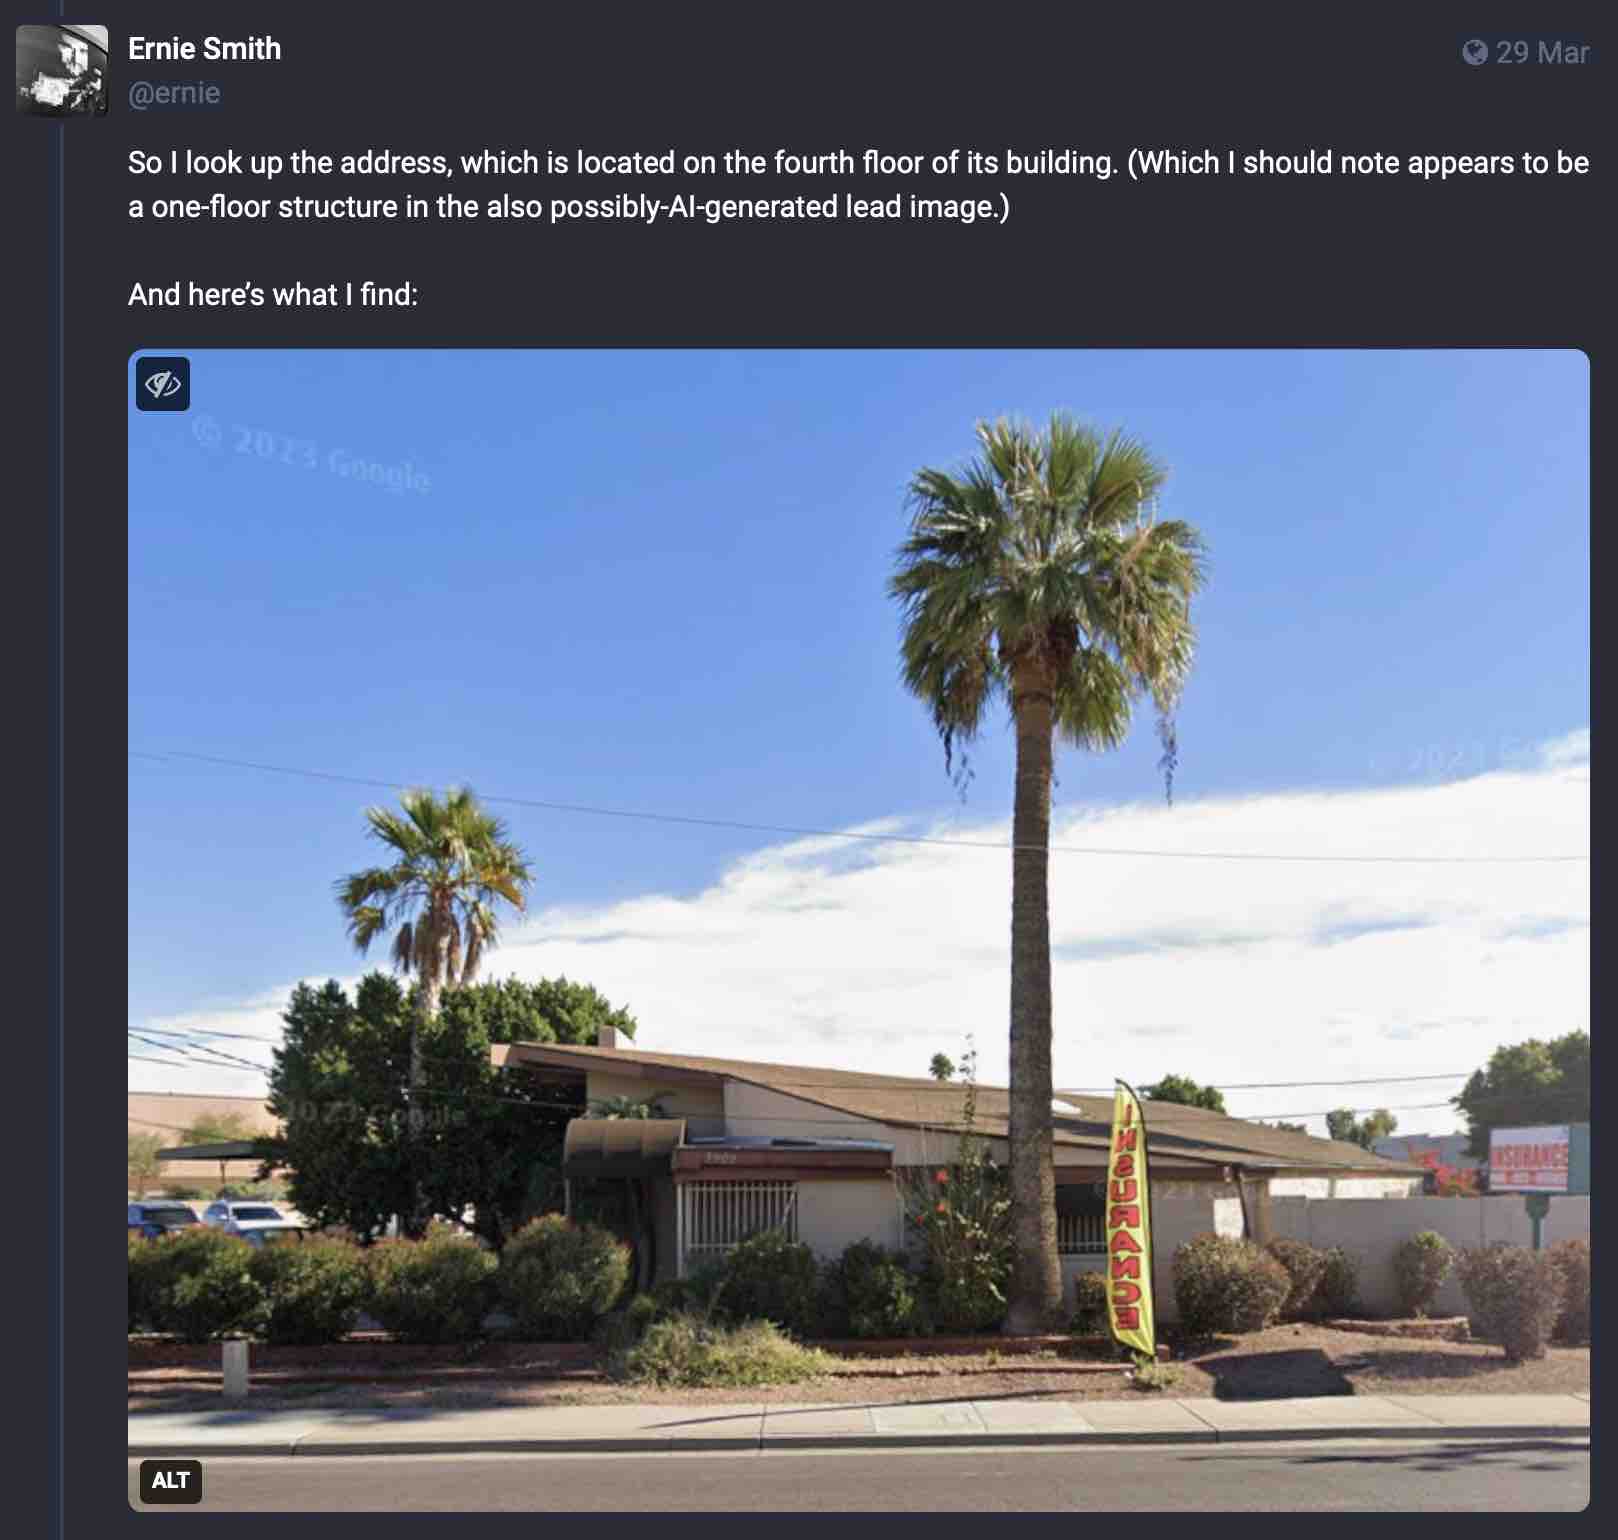 Screenshot of Ernie Smith's Mastodon post showing the address of the law firm which is a one-storey structure as found on Google Maps